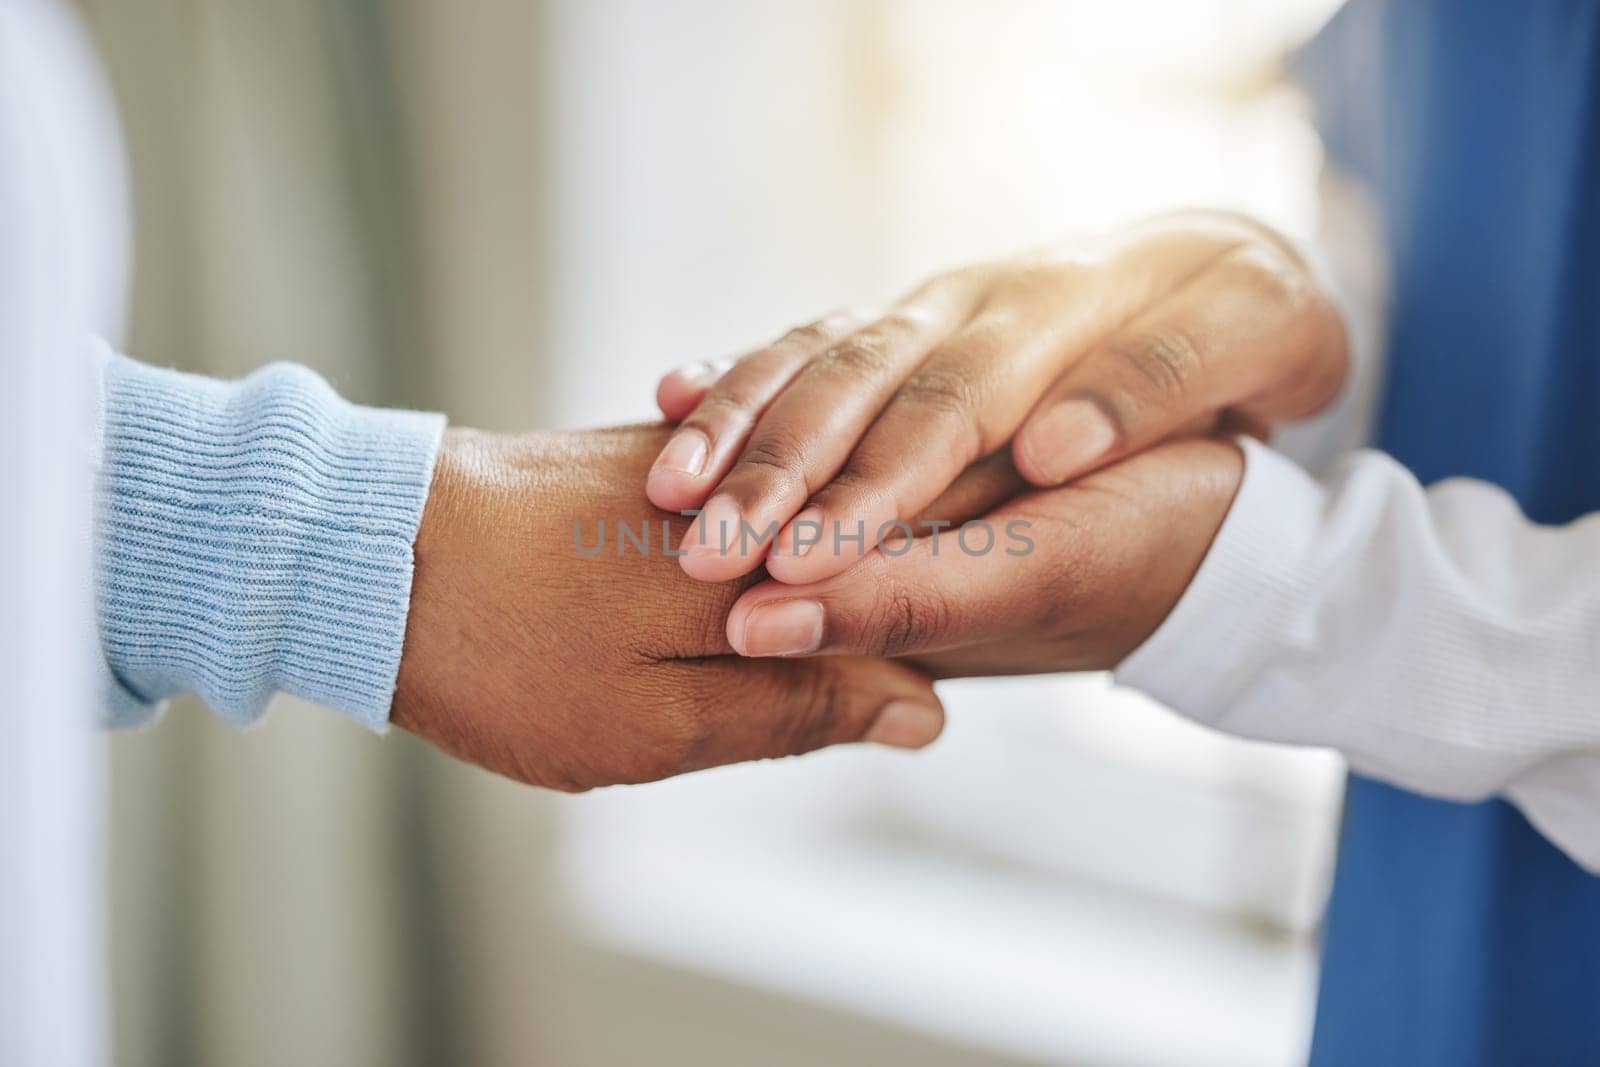 Patient, nurse and holding hands for support, healthcare or empathy at nursing home. Medical worker and person together for trust, therapy and counseling or help for health or cancer results.